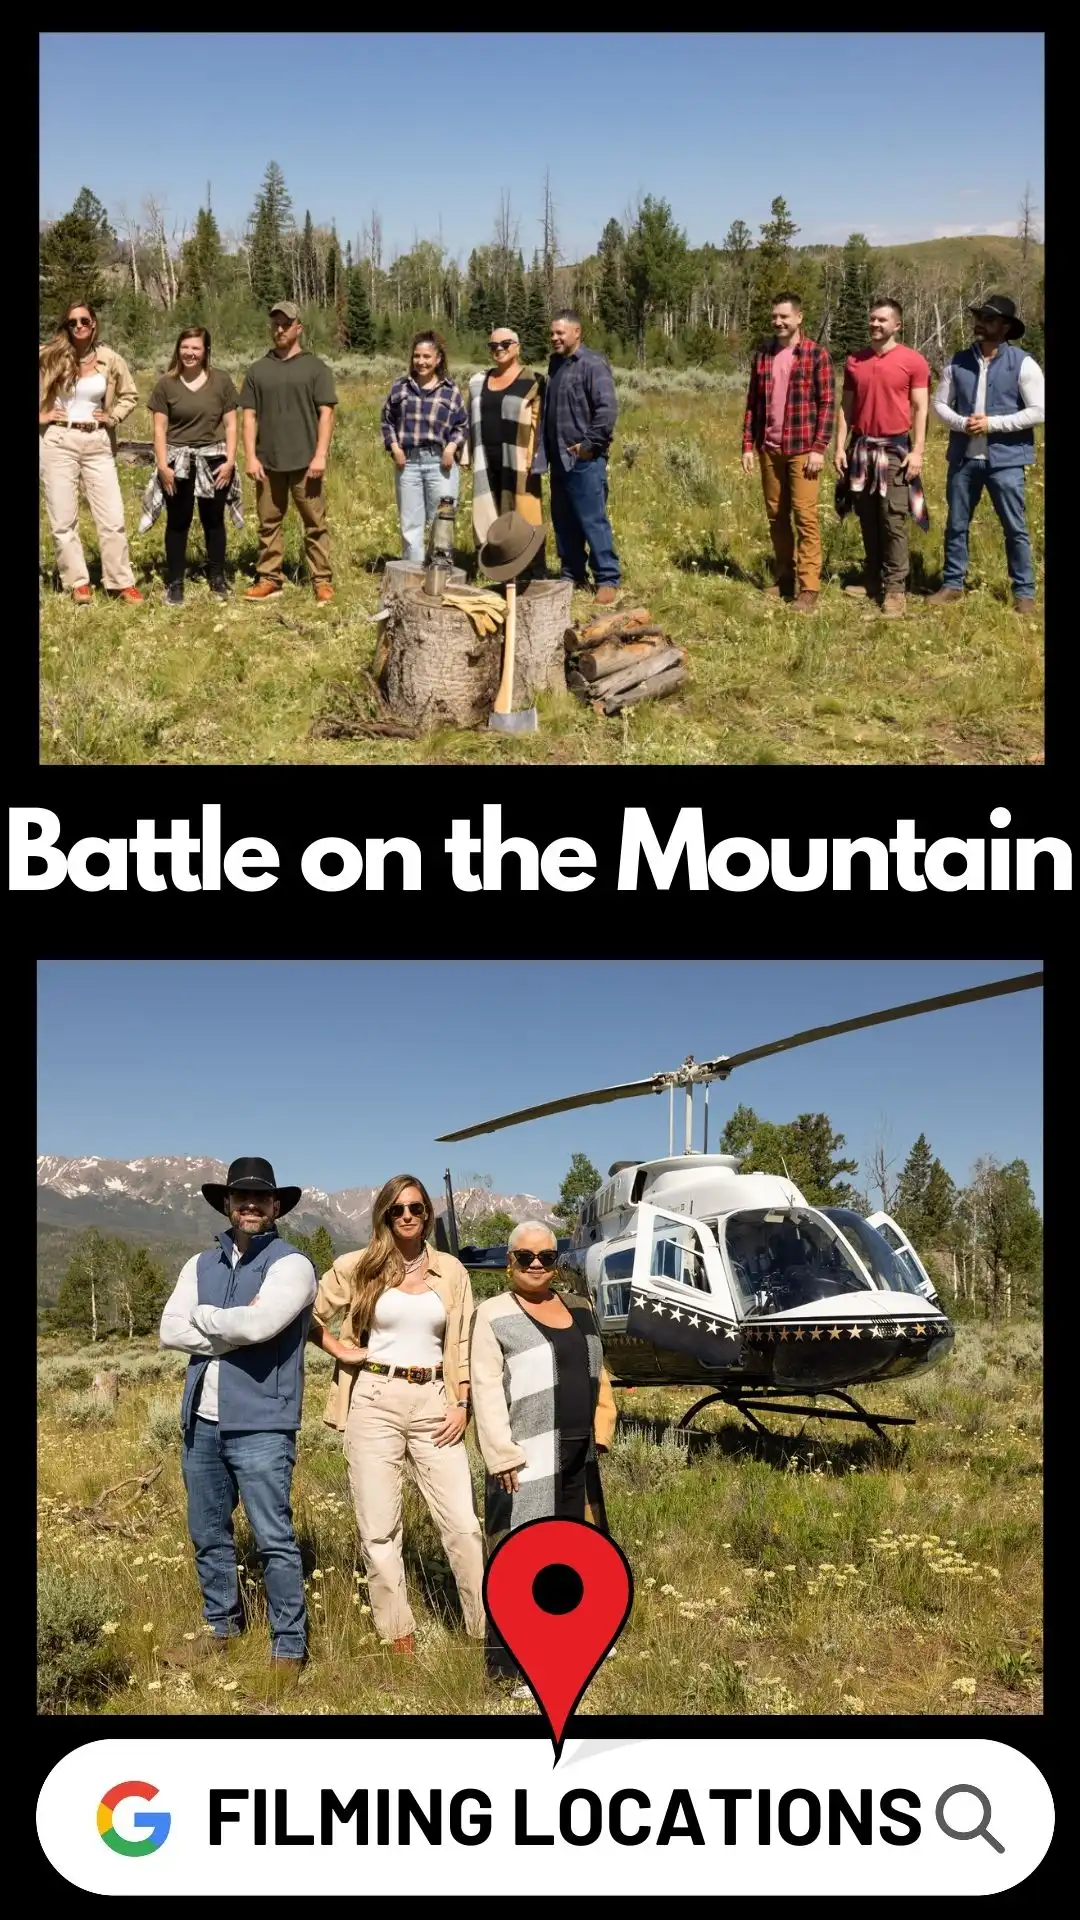 Battle on the Mountain Filming Locations